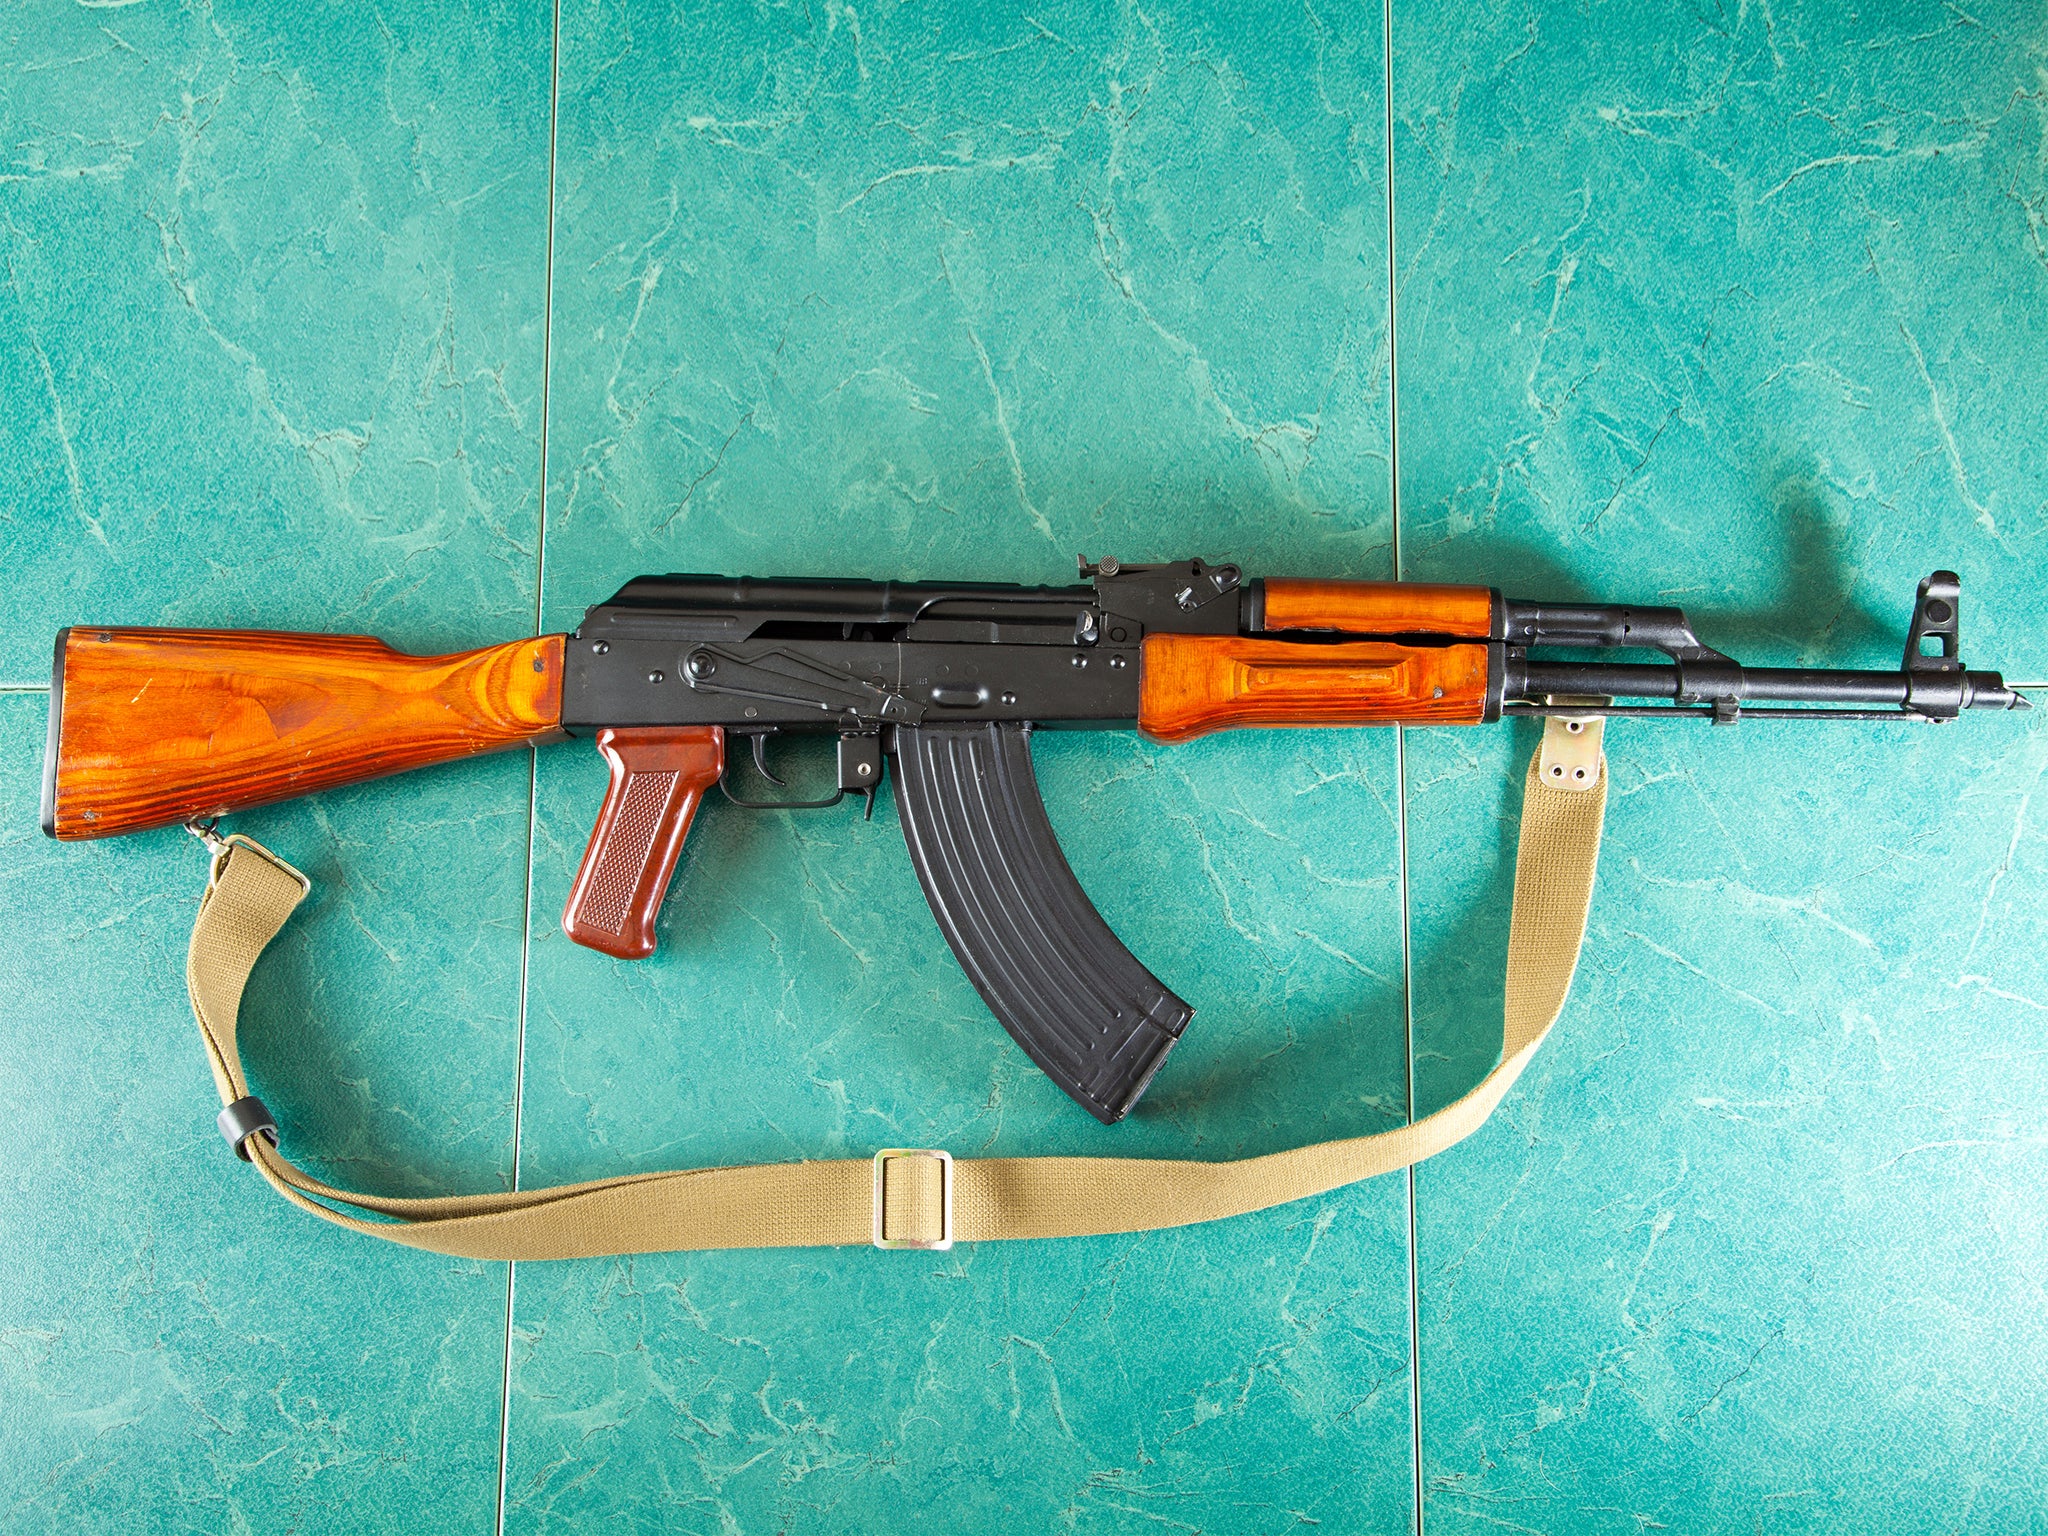 The AK-47: a malevolent 'super-power' that changed the course of history